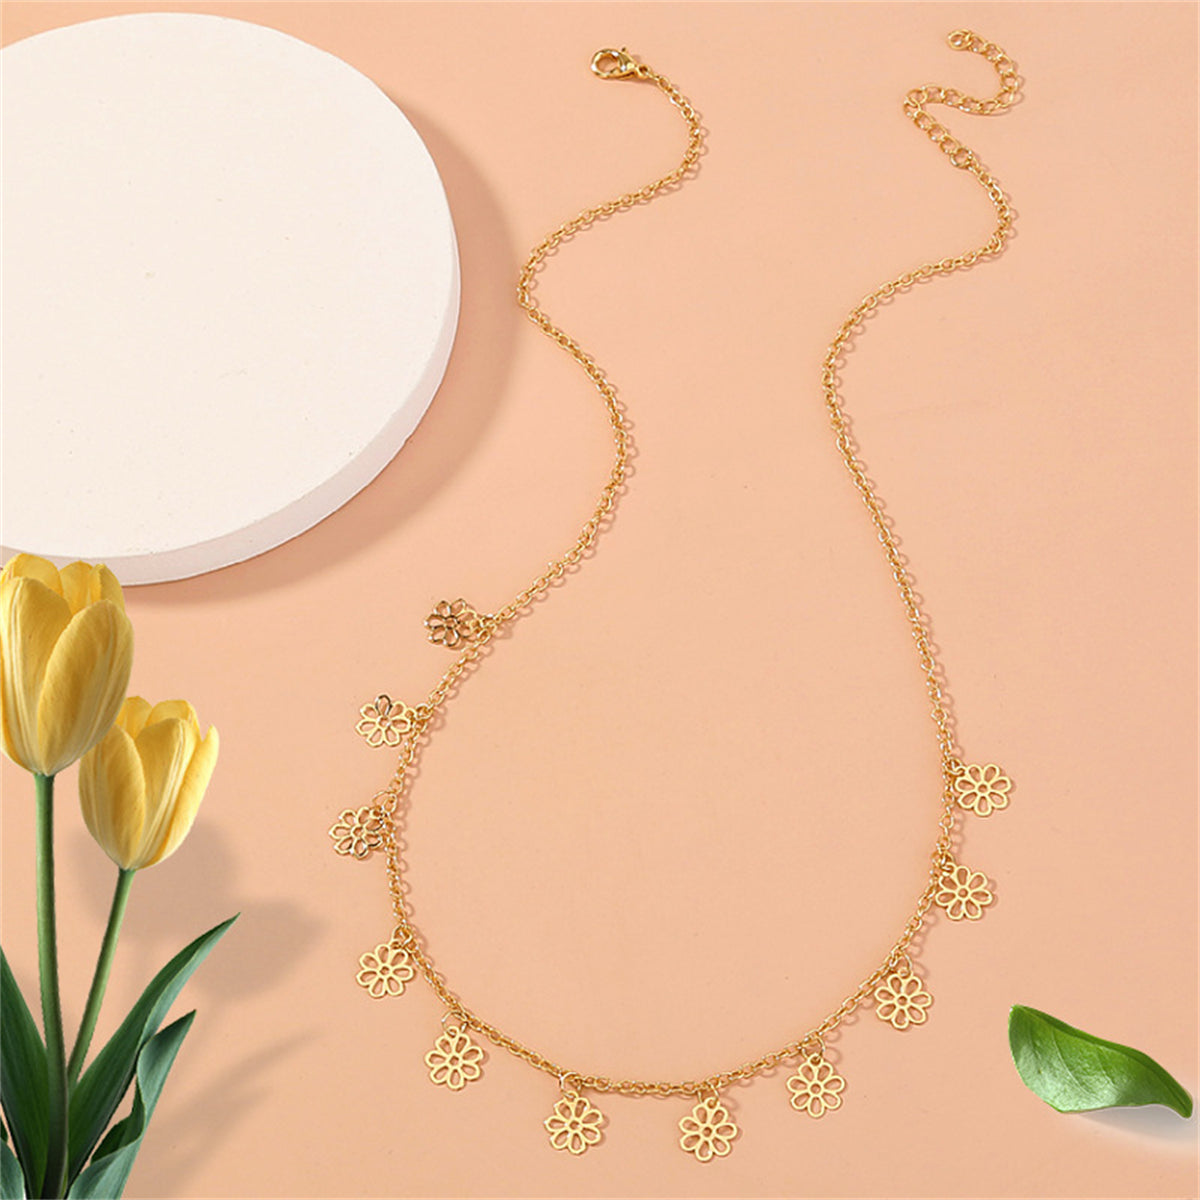 18K Gold-Plated Open Flower Station Necklace